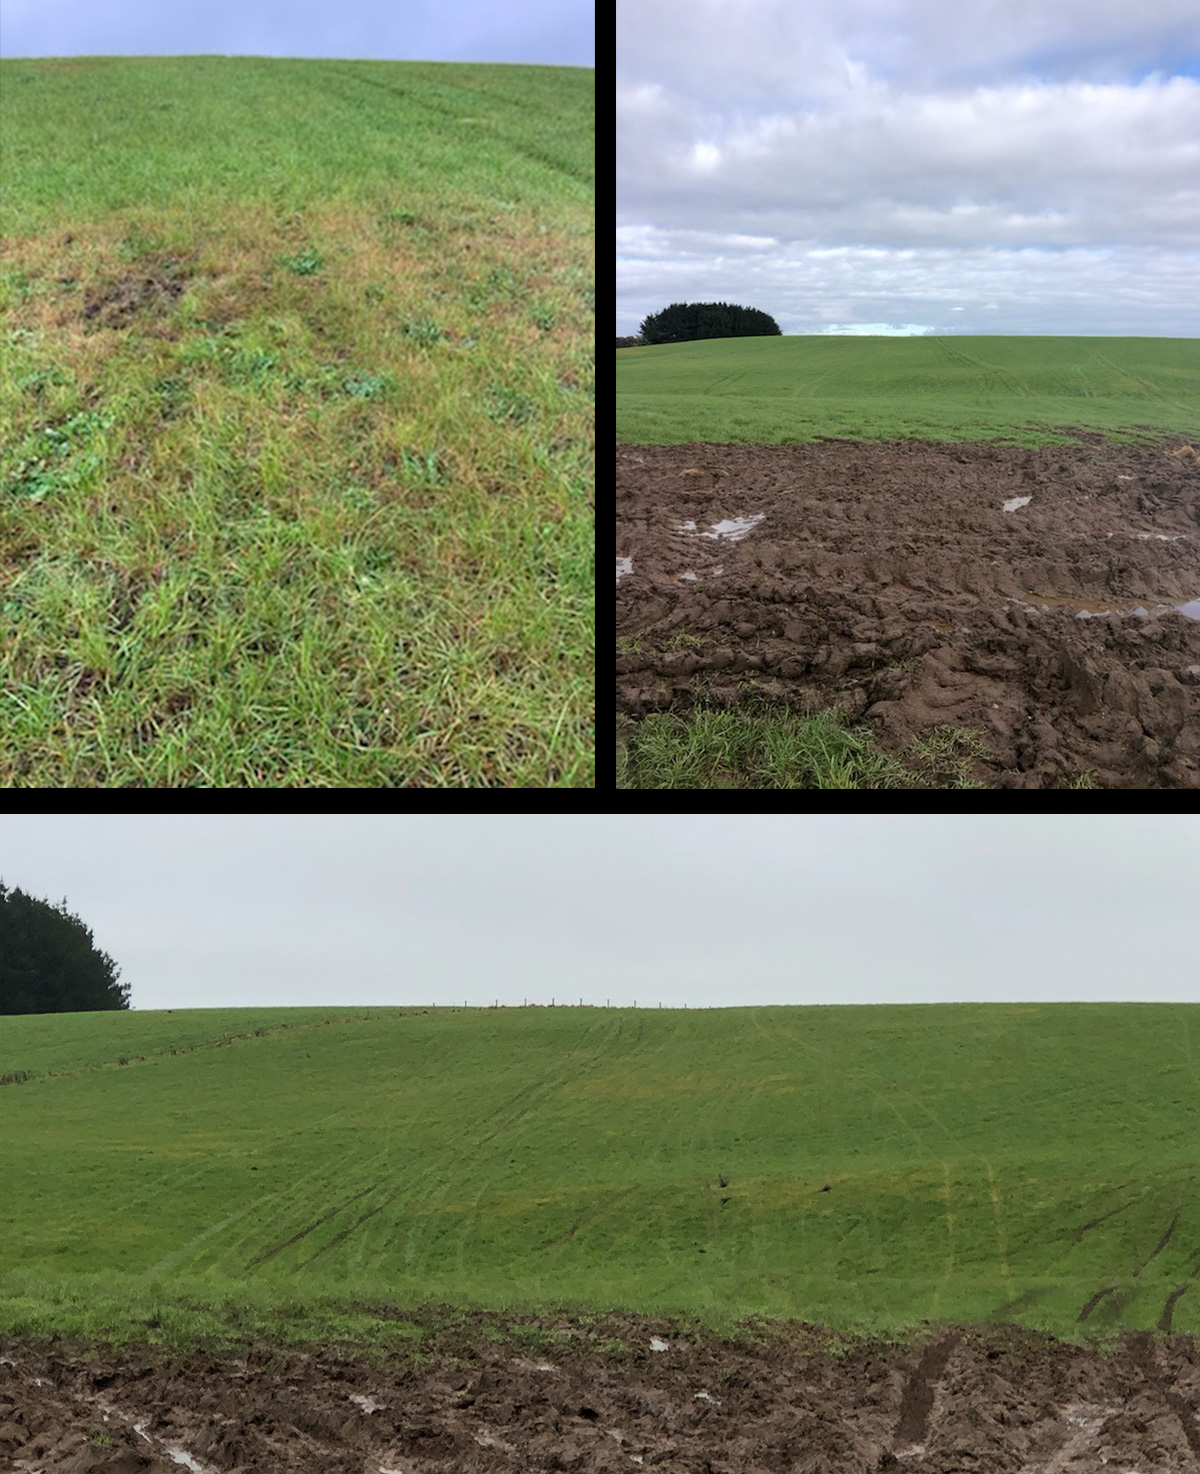 Grass paddock badly damaged by pesticide resistant grass grub that has been repaired after application of pest solution BioPest